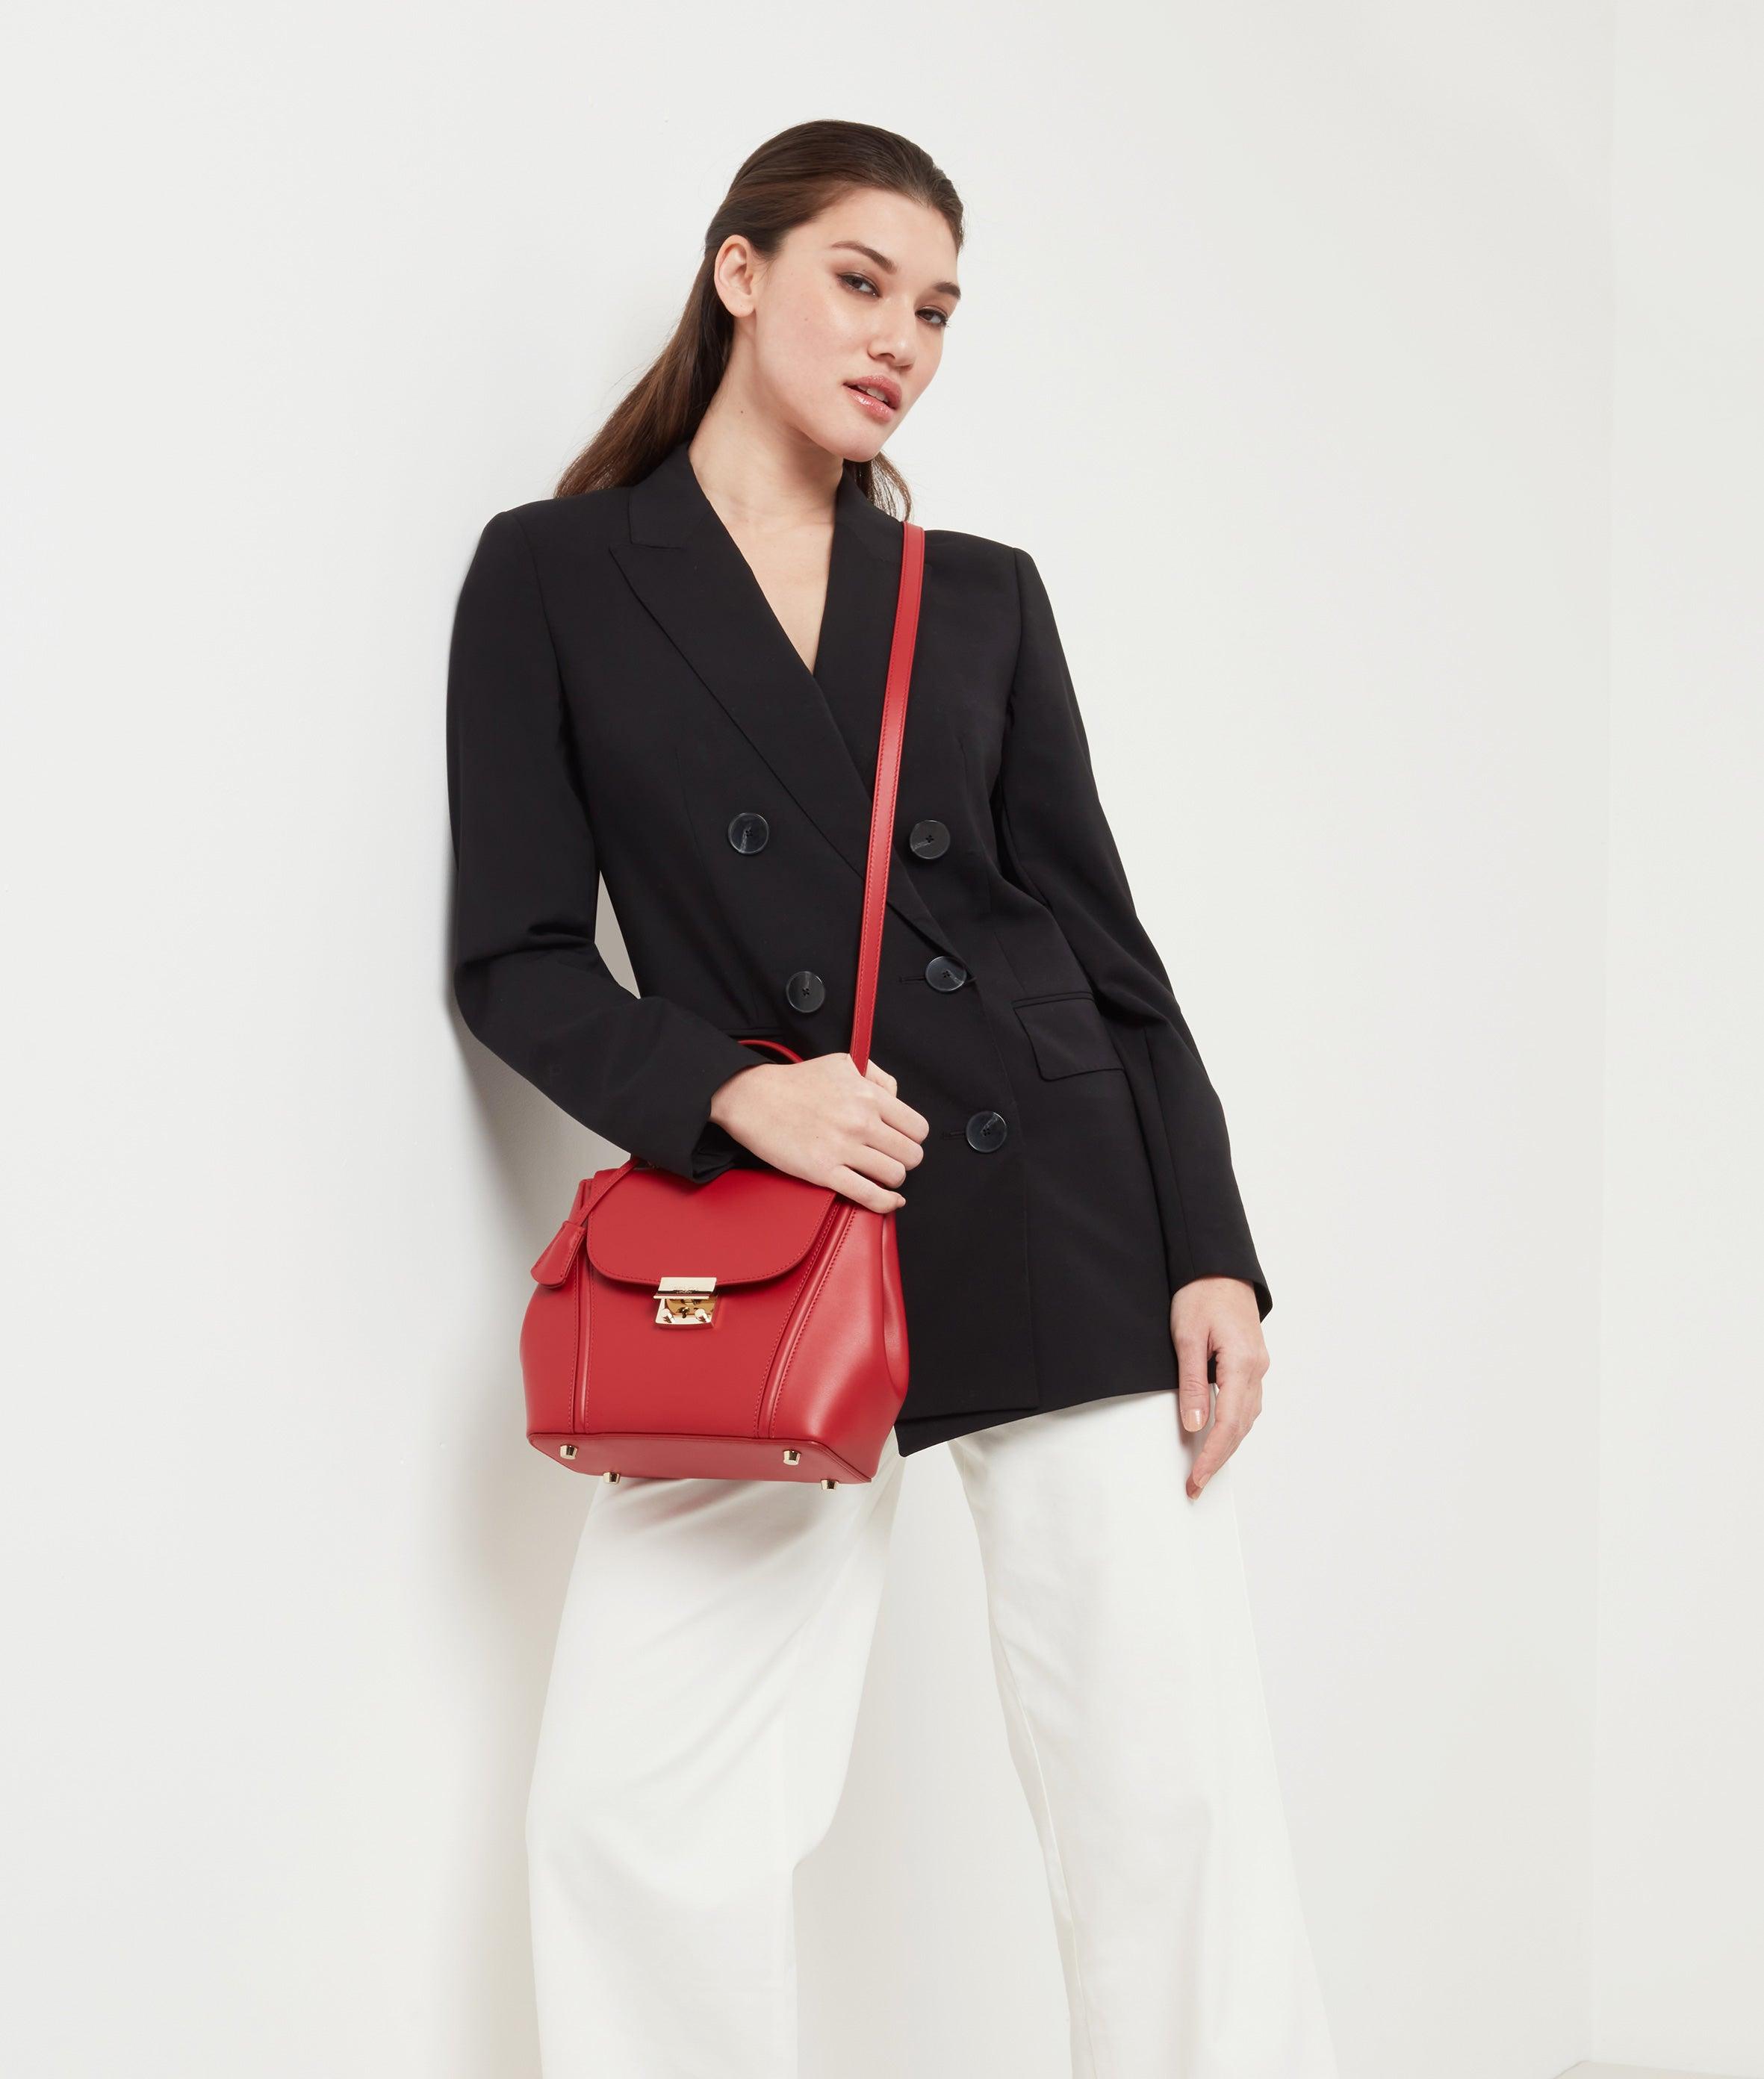 Red Small Top Handle Designer Bag - A fusion of London design and Italian craftsmanship.